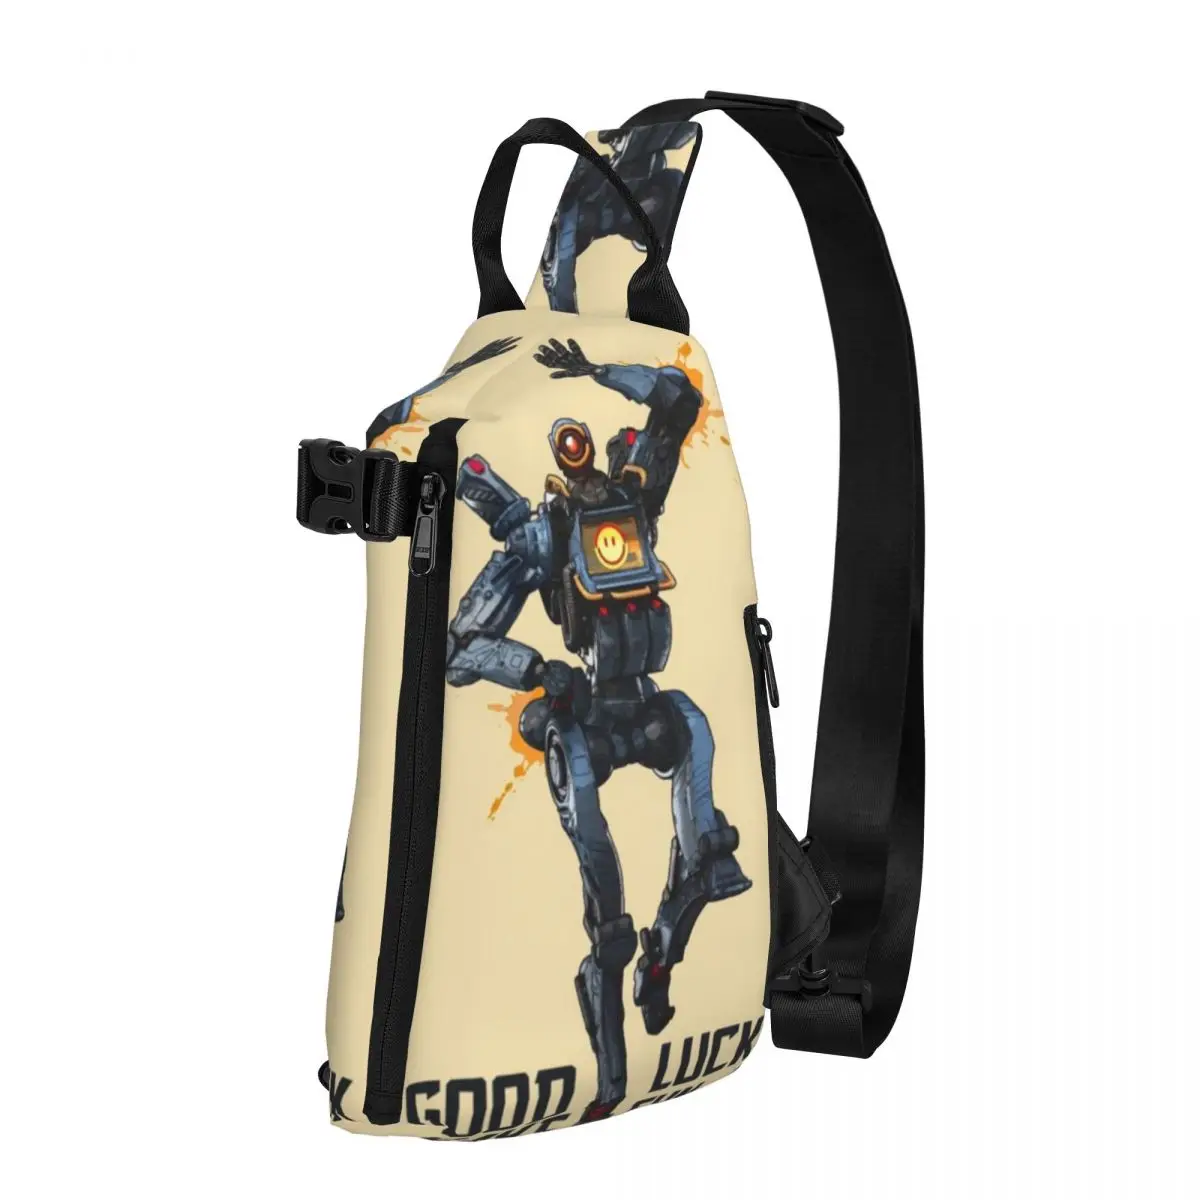 

Pathfinder Dont Die Shoulder Bags Apex legends Modern Chest Bag Unisex Phone Travel Sling Bag Running Graphic Small Bags